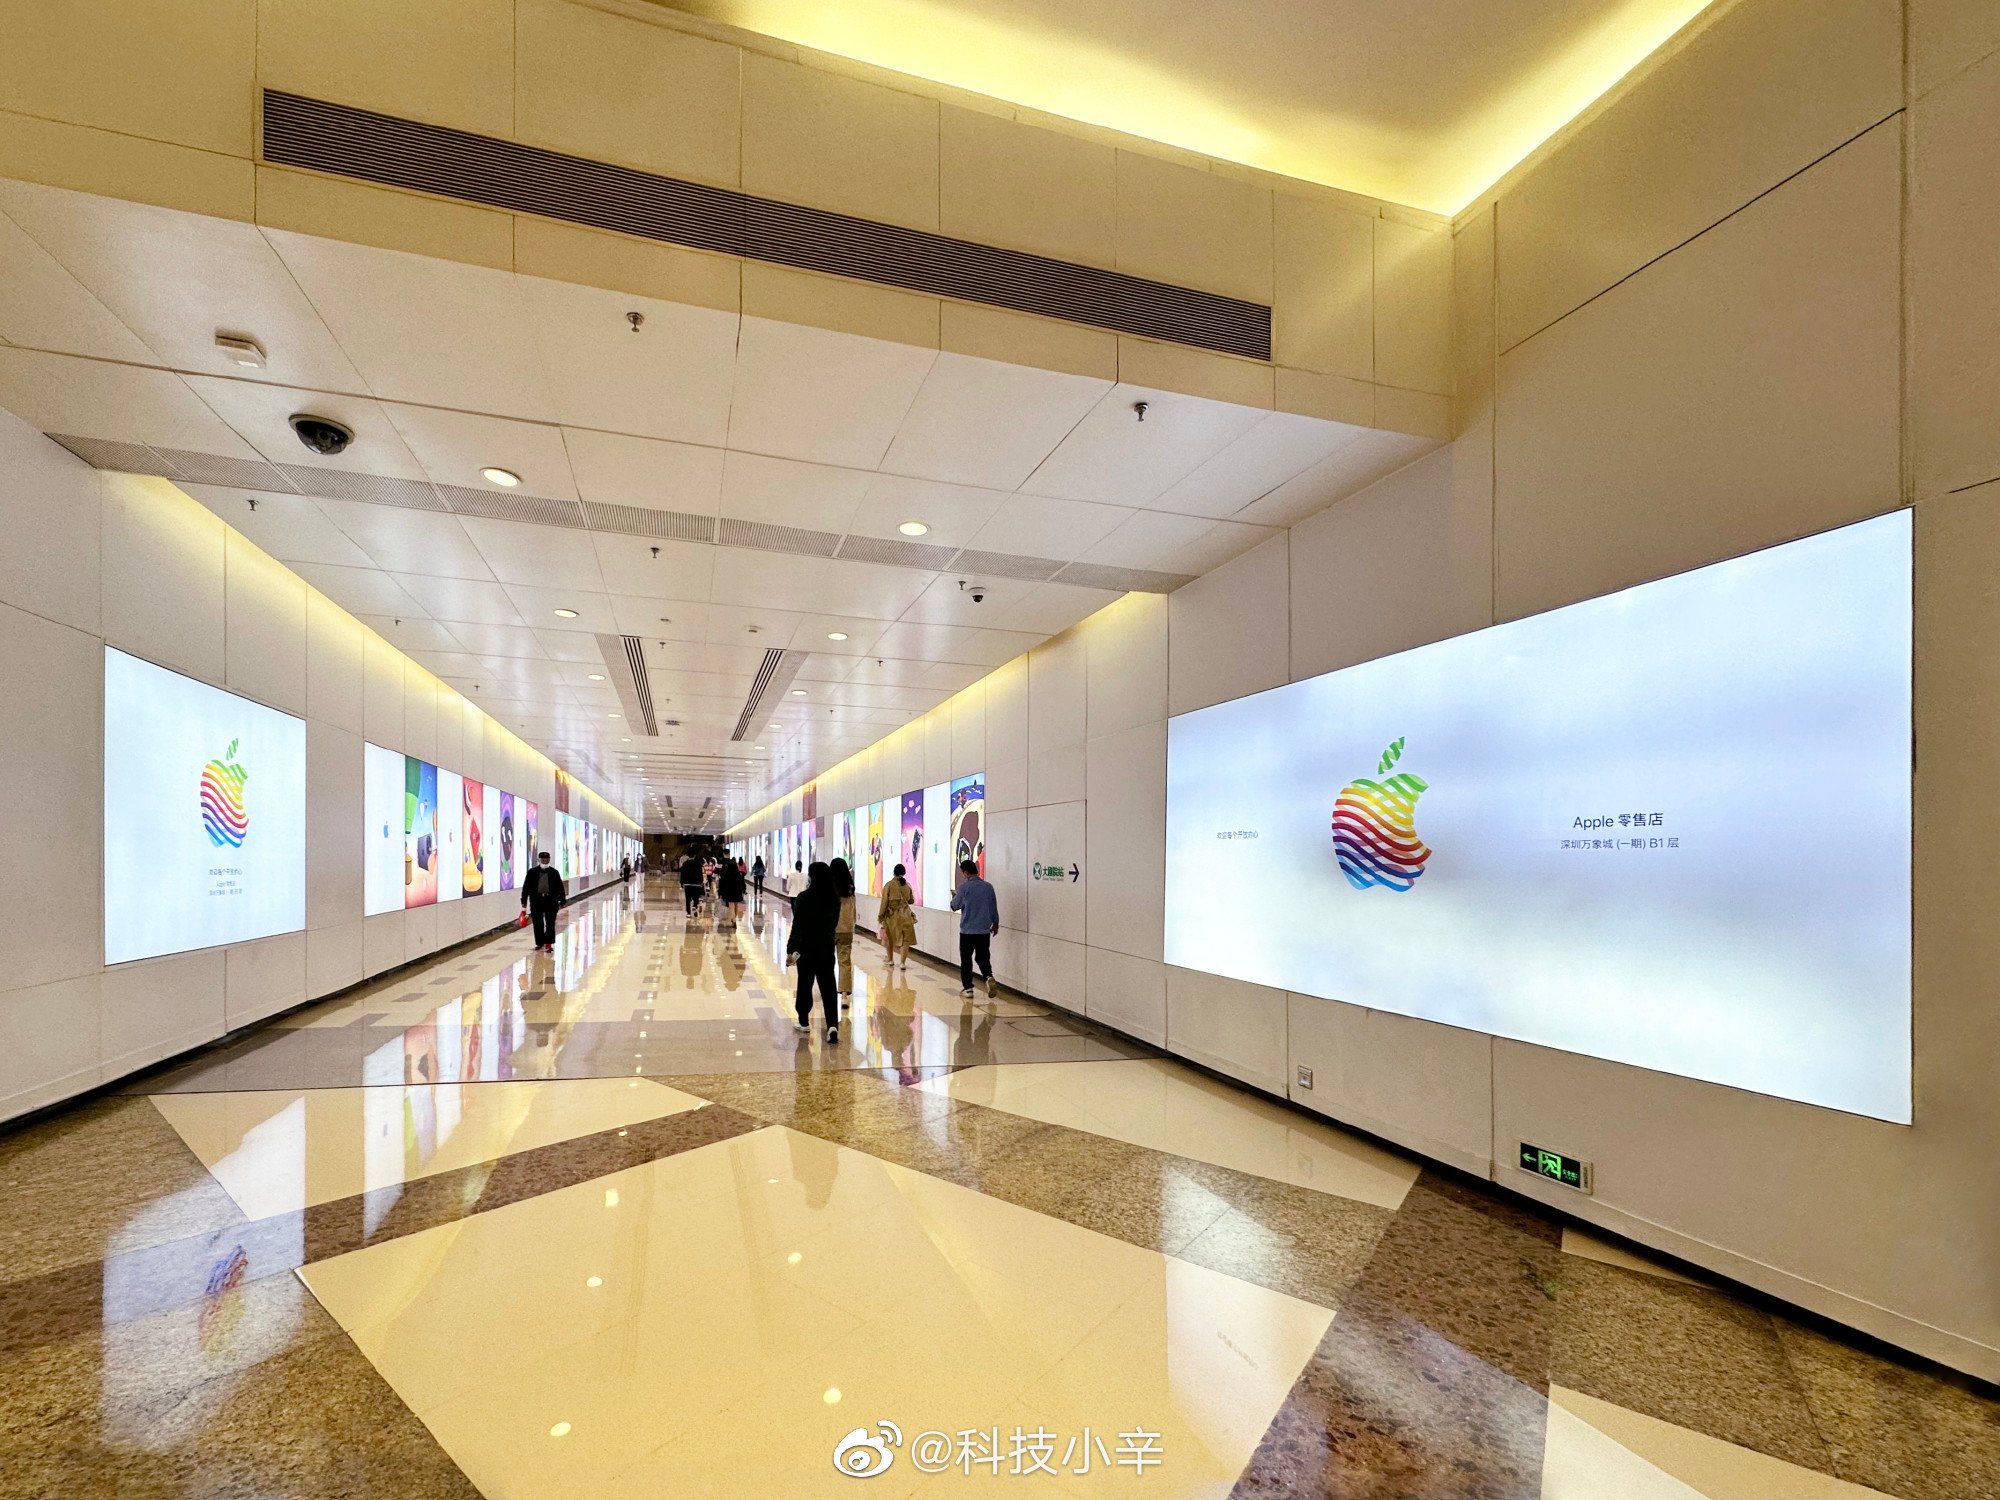 Apple Store Retail Mall Location. Apple Sells and Services IPhones